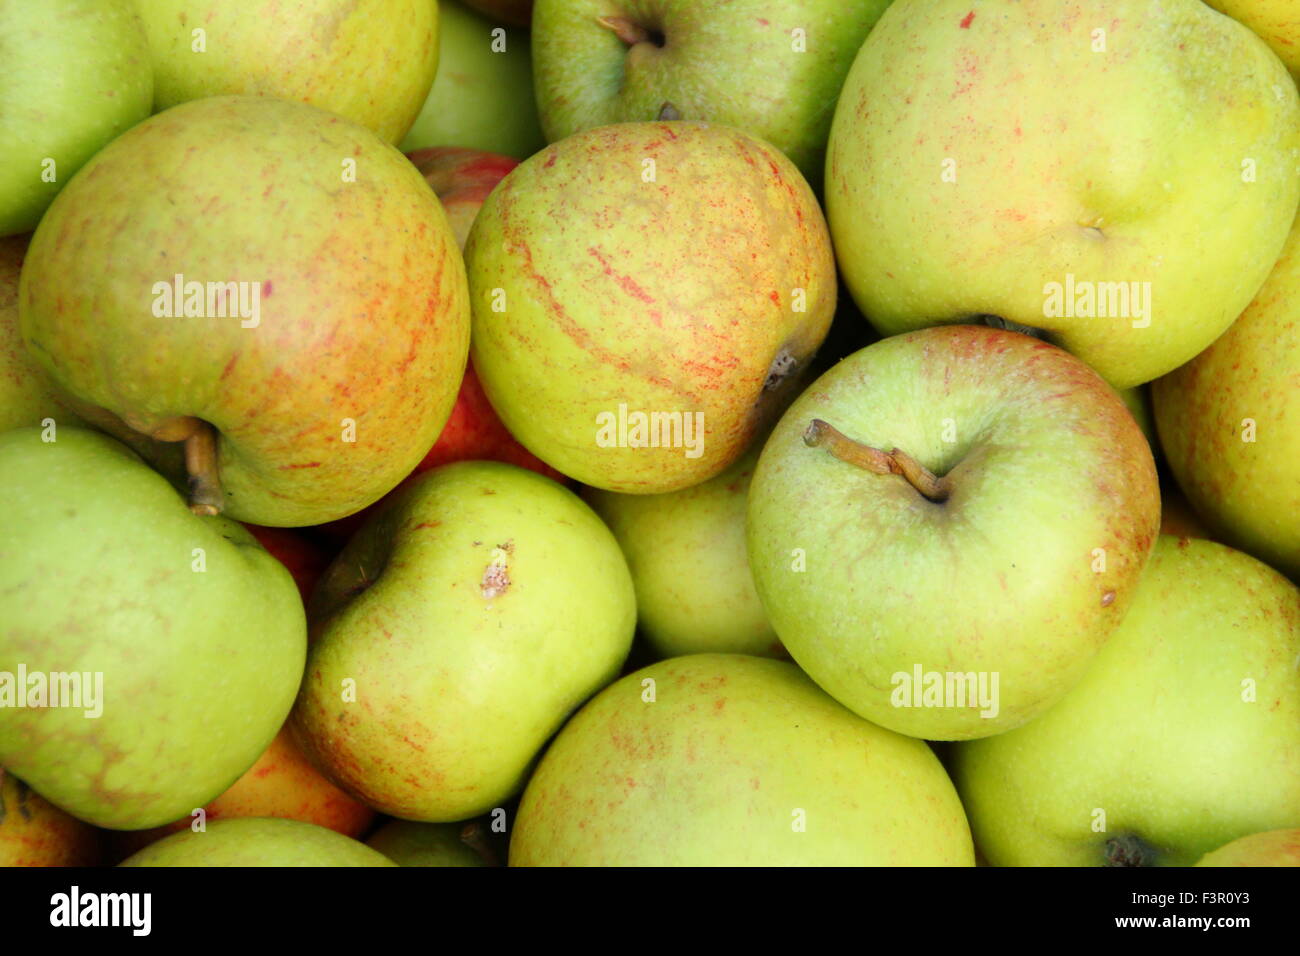 English apples, harvested from gardens are gathered for pressing at an Apple Day festival at Sheffield, Yorkshire, UK - October Stock Photo